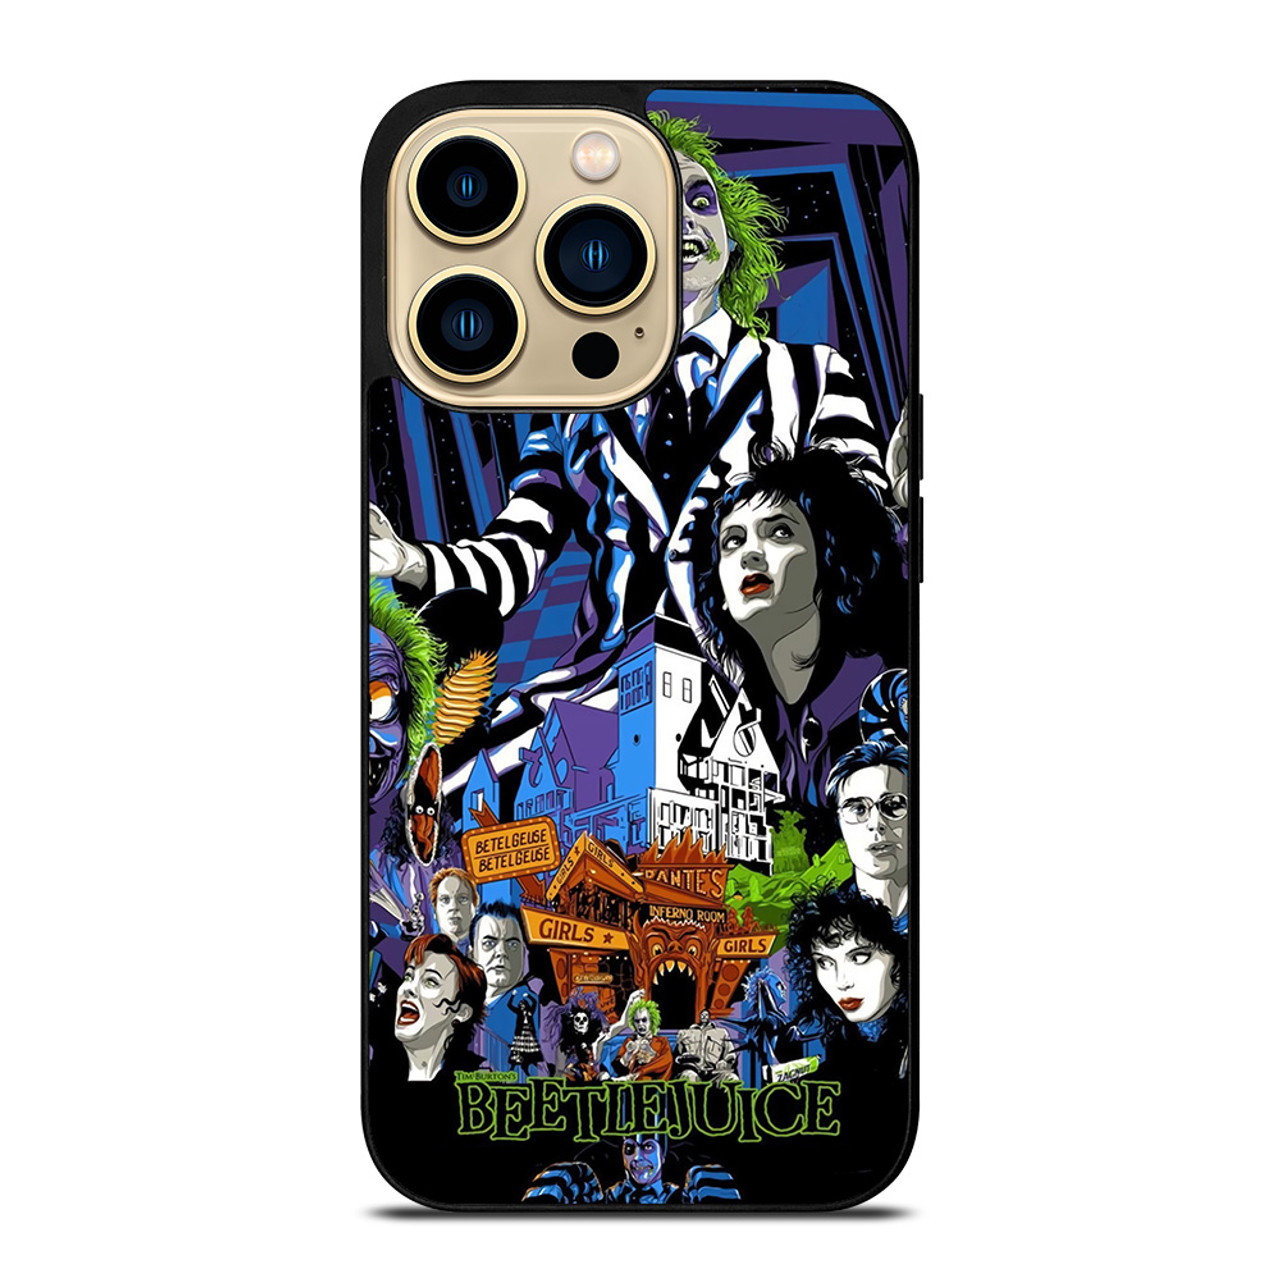 https://cdn11.bigcommerce.com/s-9chjulhvl5/images/stencil/1280x1280/products/259994/266456/BEETLEJUICE%20TIM%20BURTON%20MOVE%20iPhone%2014%20Pro%20Max%20Case%20Cover__55297.1663156117.jpg?c=1